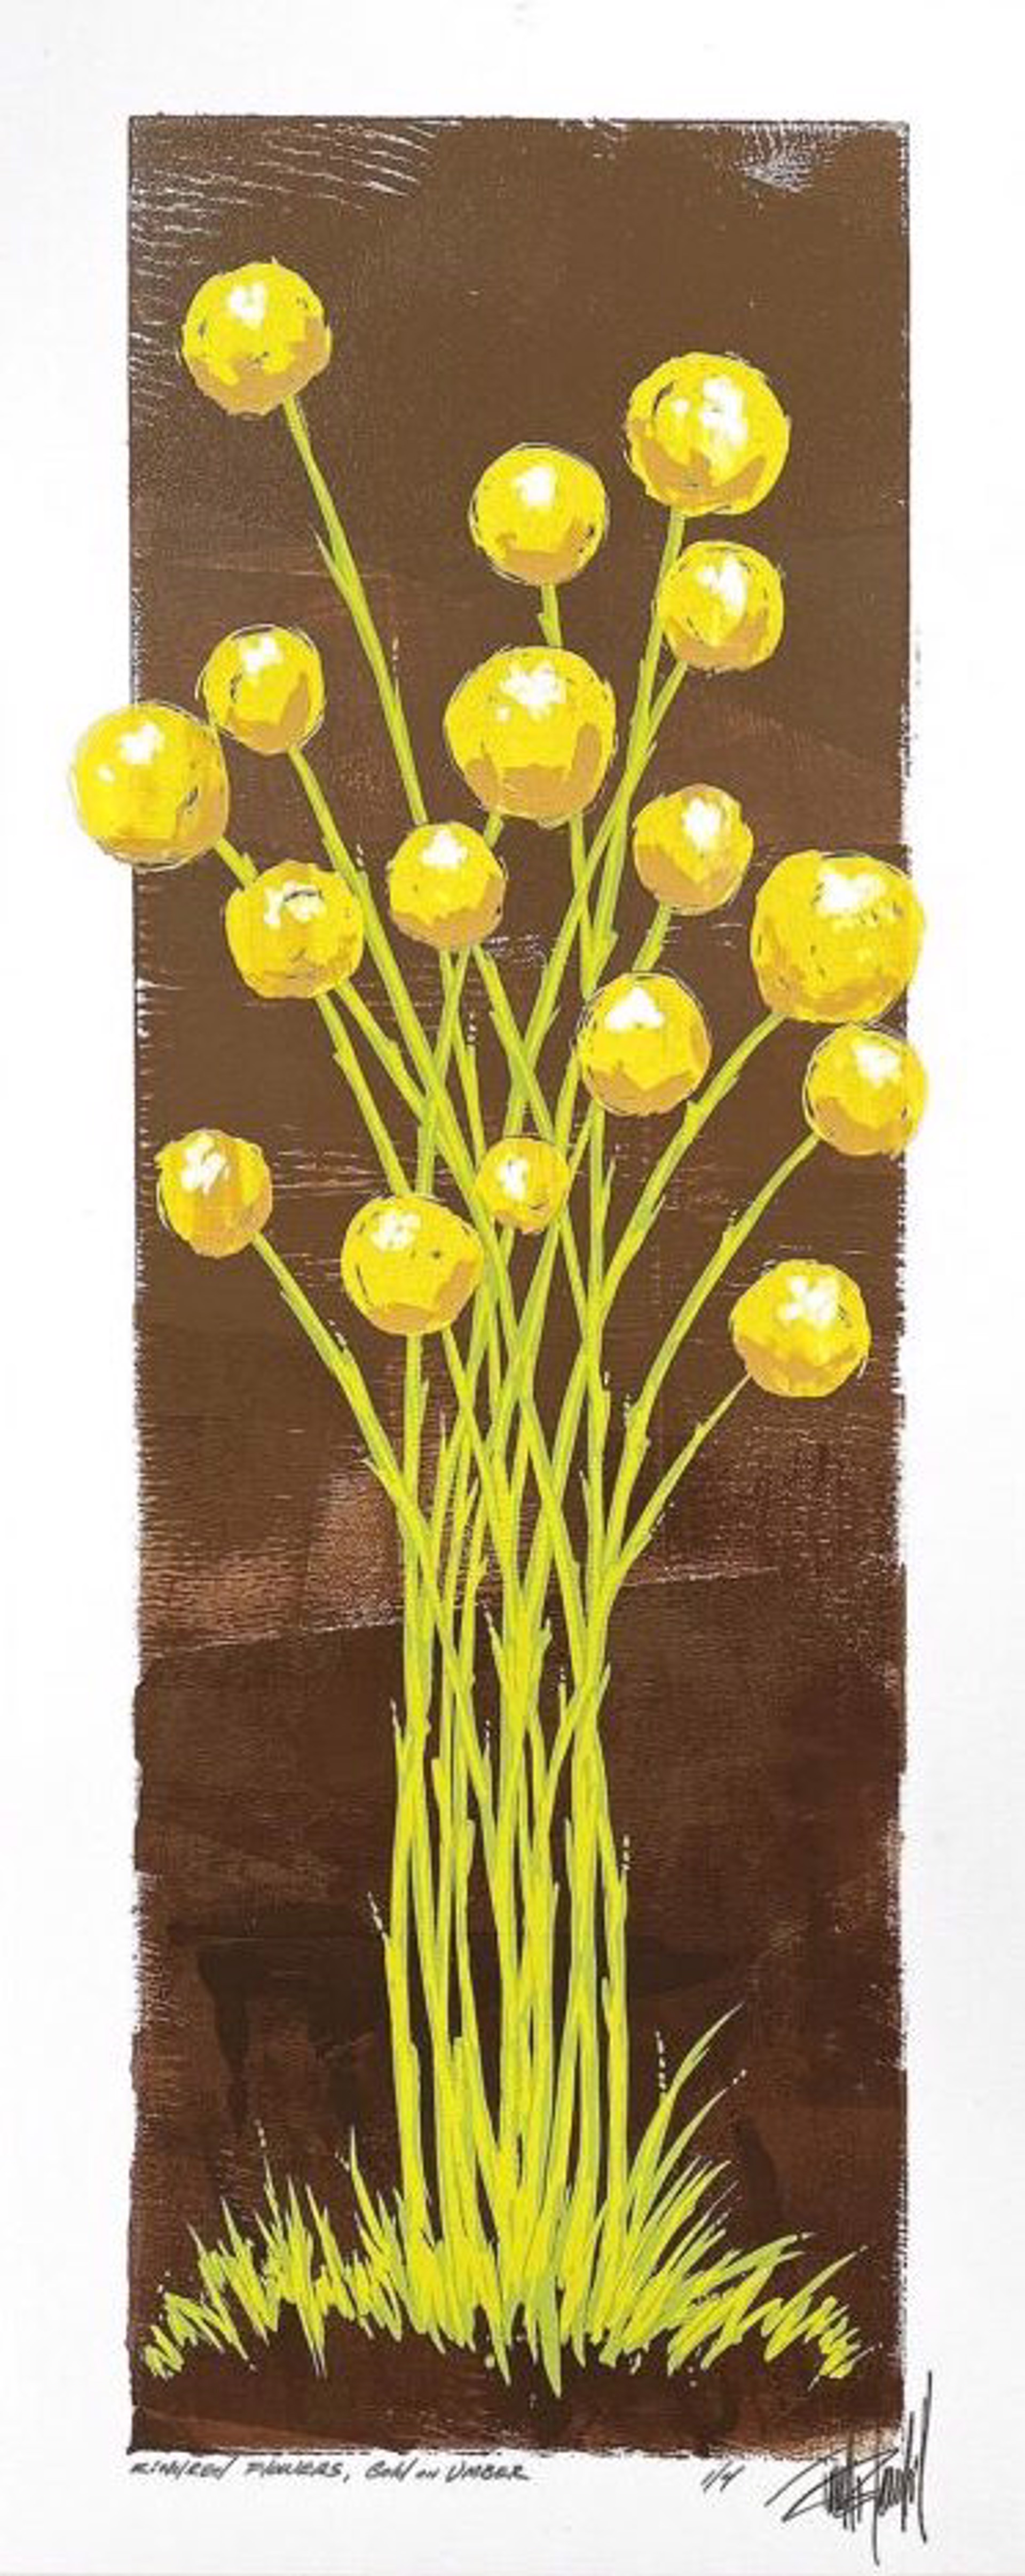 Kindred Flowers, Gold on Umber by Terrell Thornhill